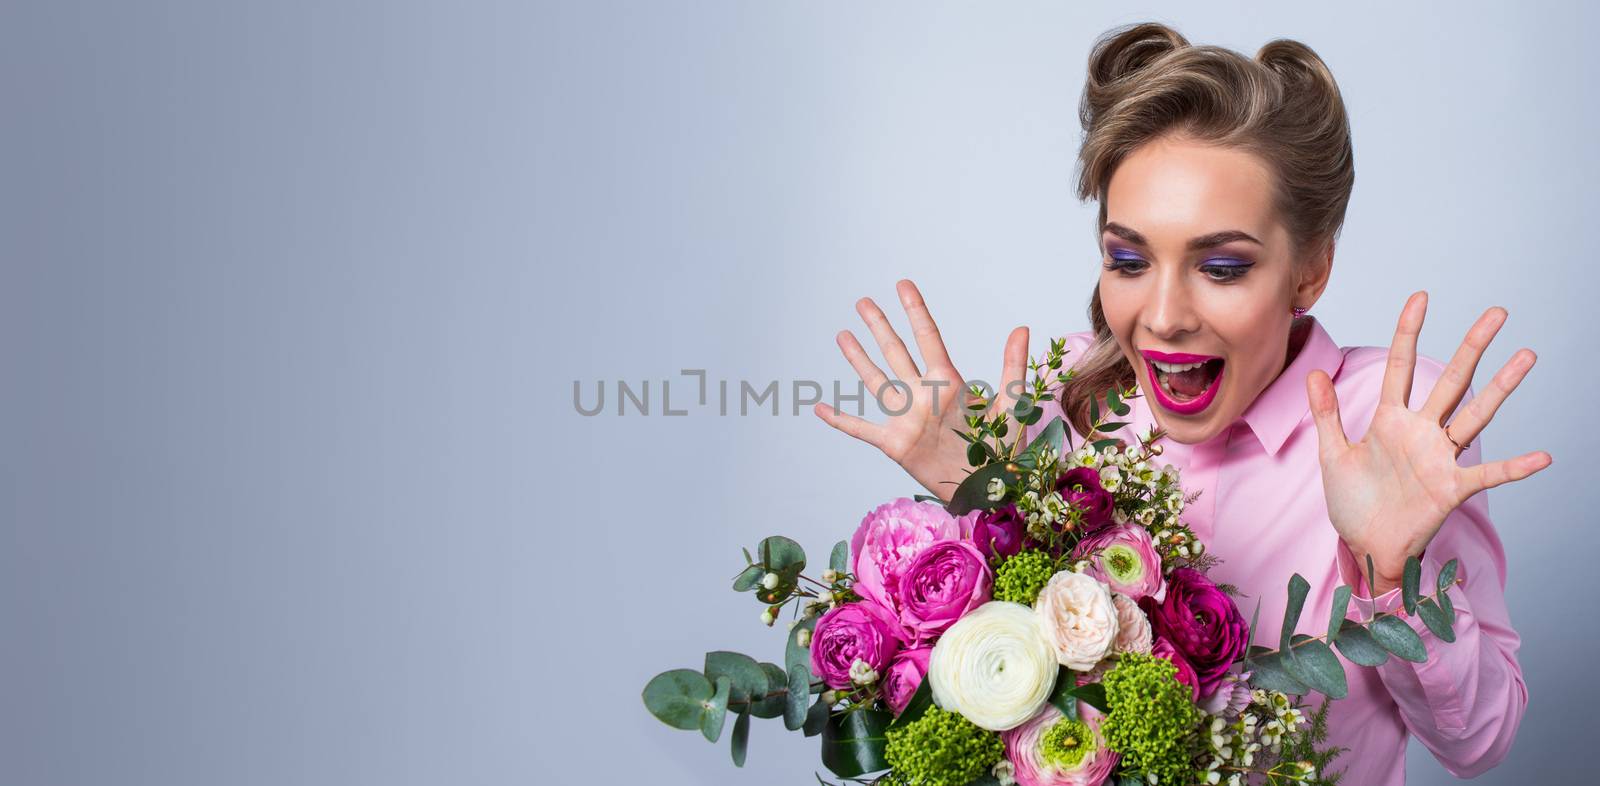 Woman surprised with bunch of flowers, funny emotional expression